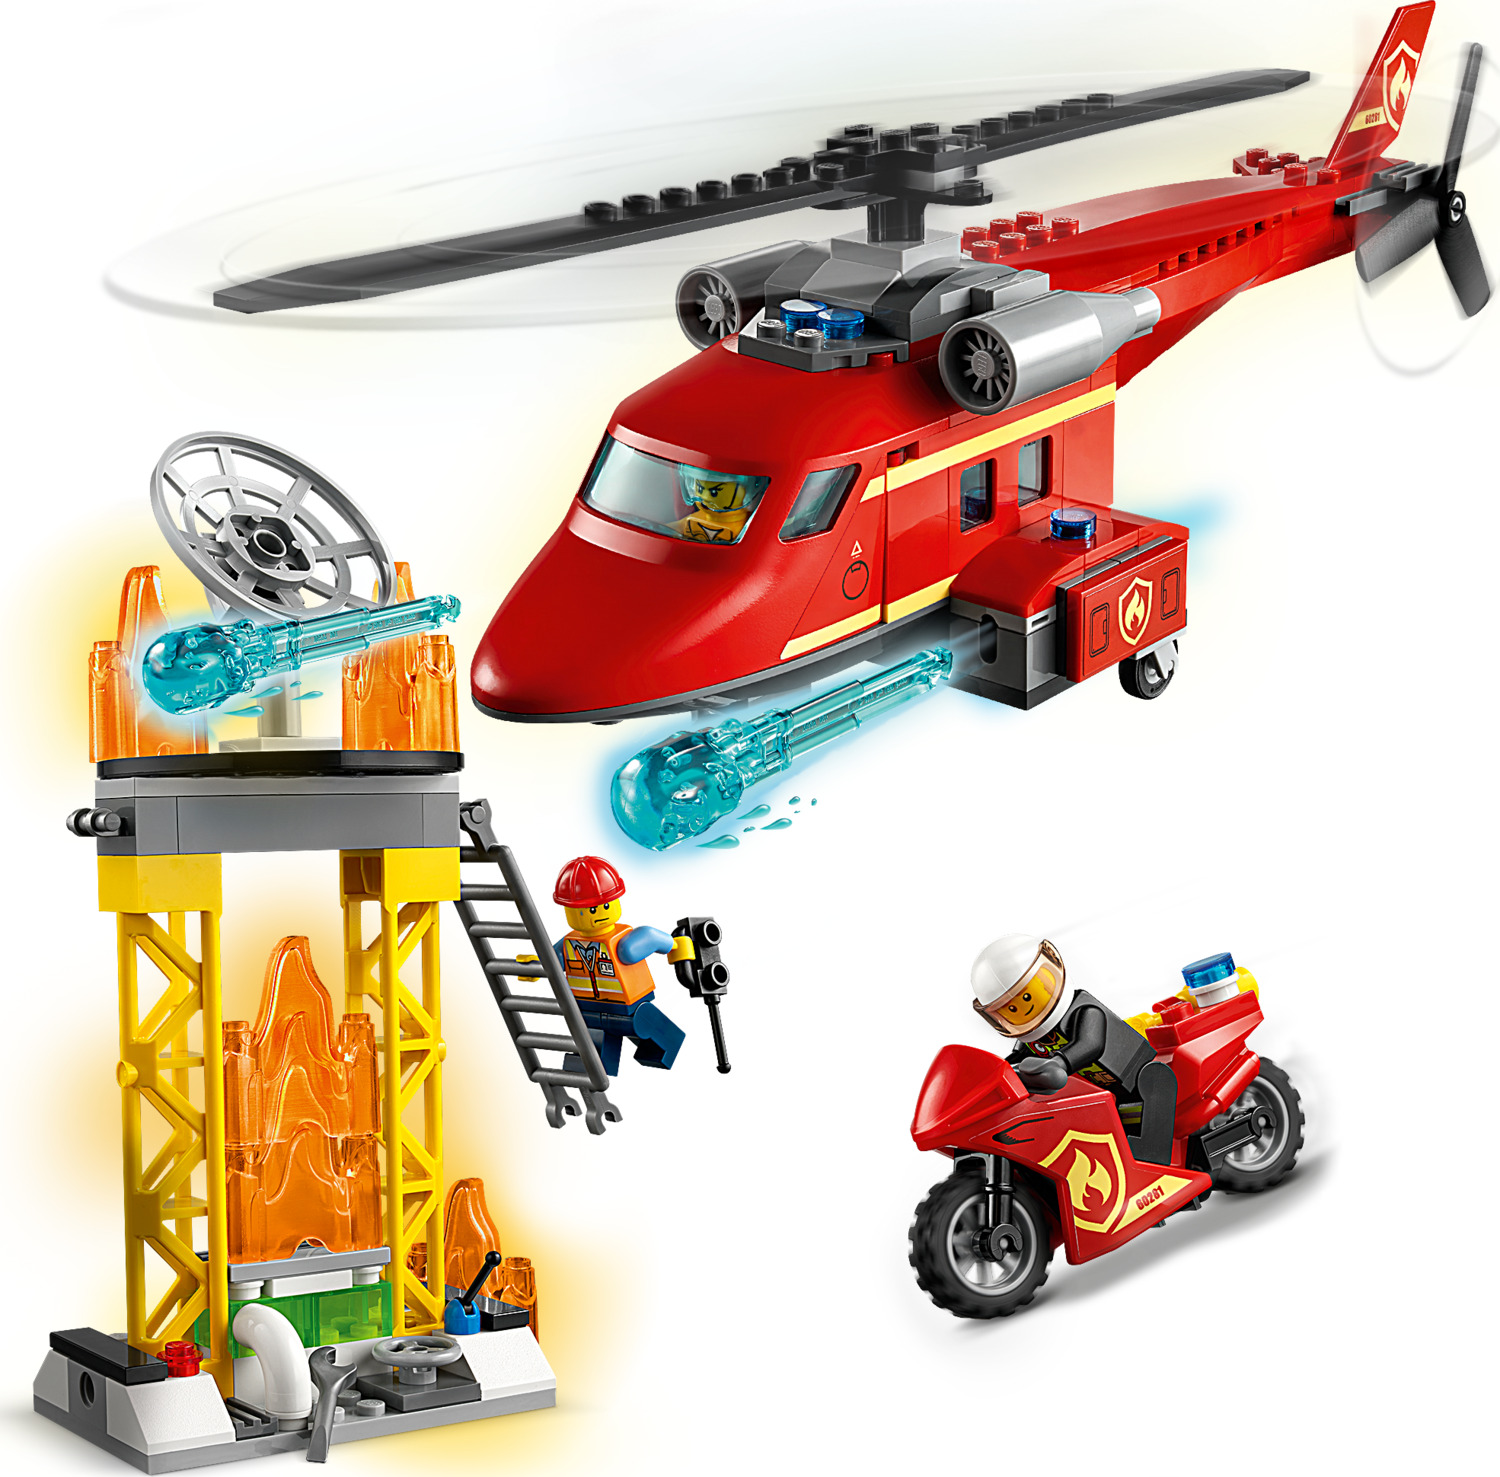 Fire Rescue Helicopter